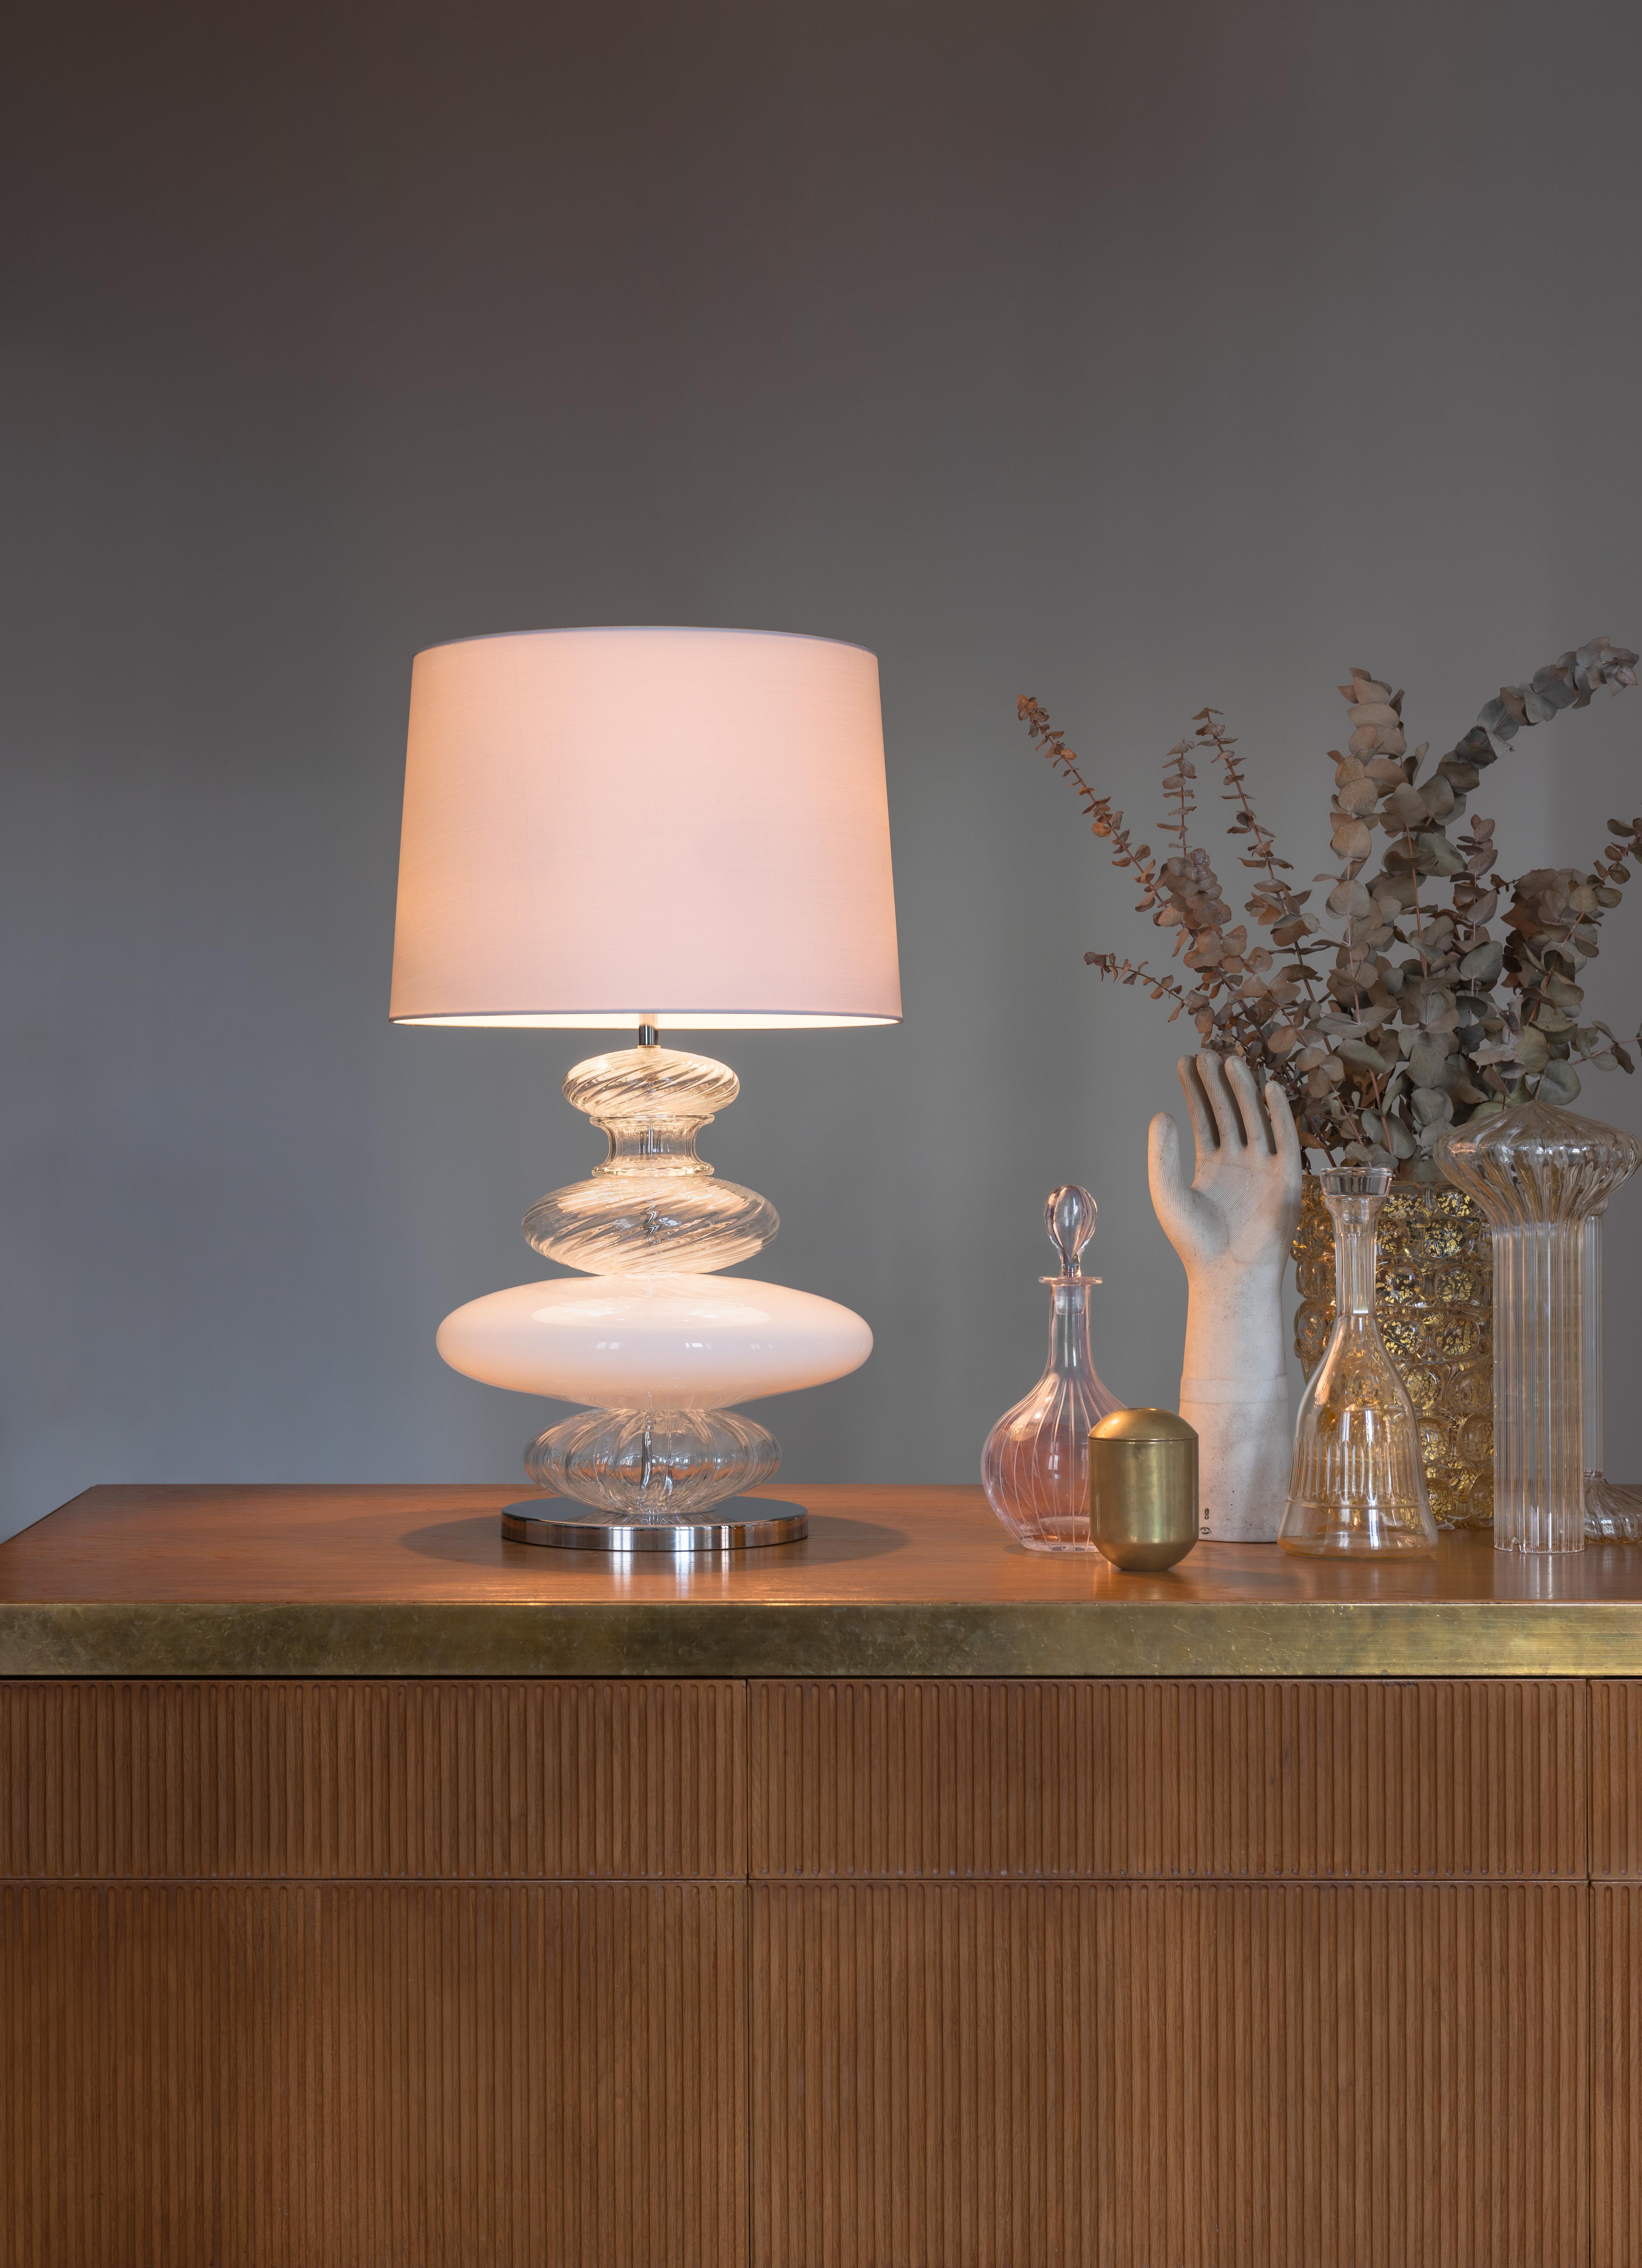 The Pigalle 5678 table lamp in white/crystal glass with a white shade, is a lamp with a lavish central body with soft-shape elements that are wrought using different techniques, on top of a chromed base. An oversized version is available. The shade